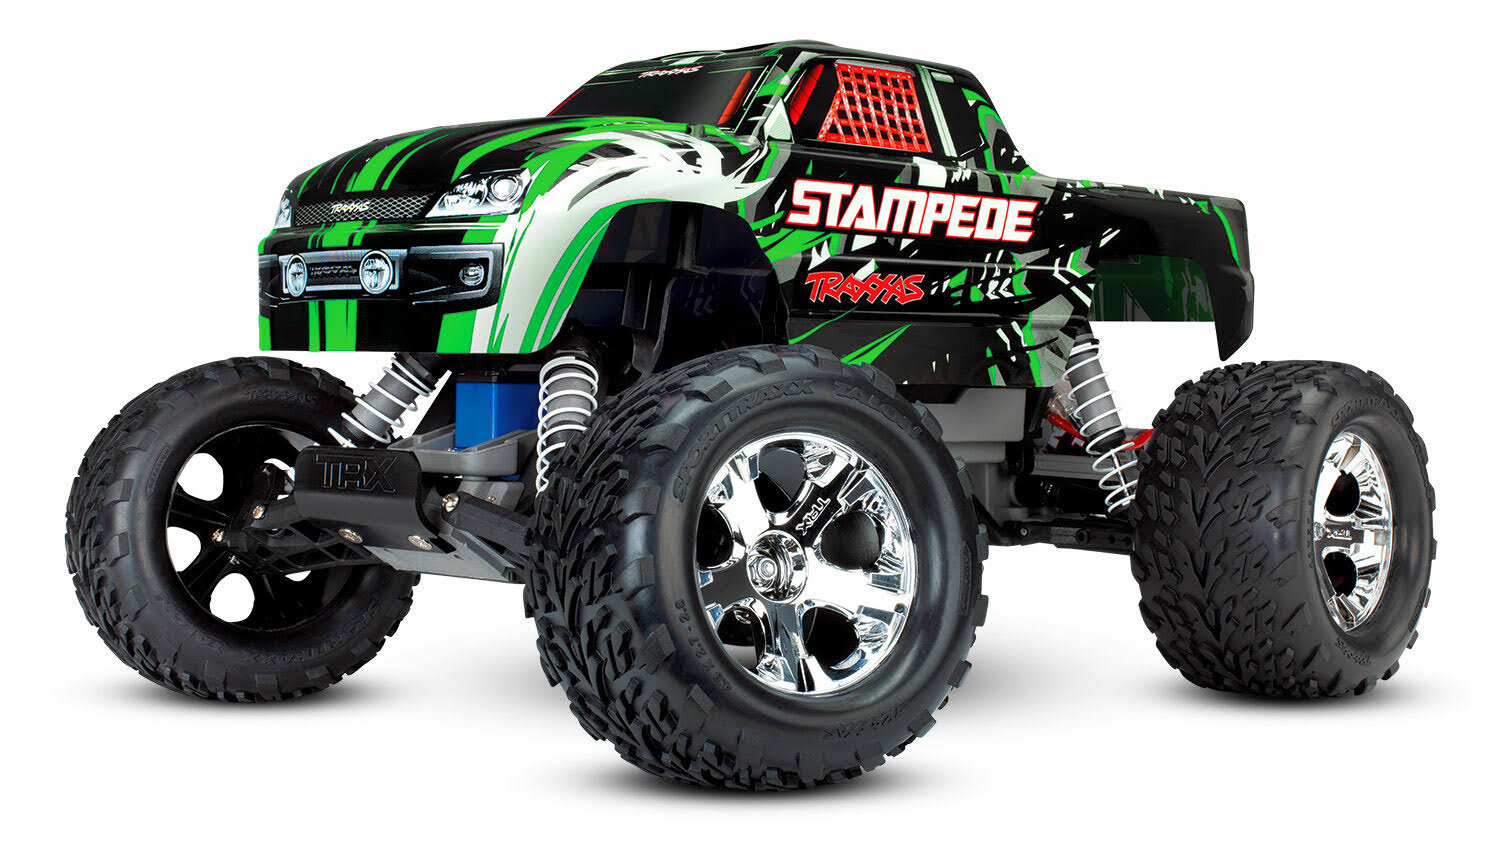 Traxxas Stampede Monster RC Truck Toy - Green